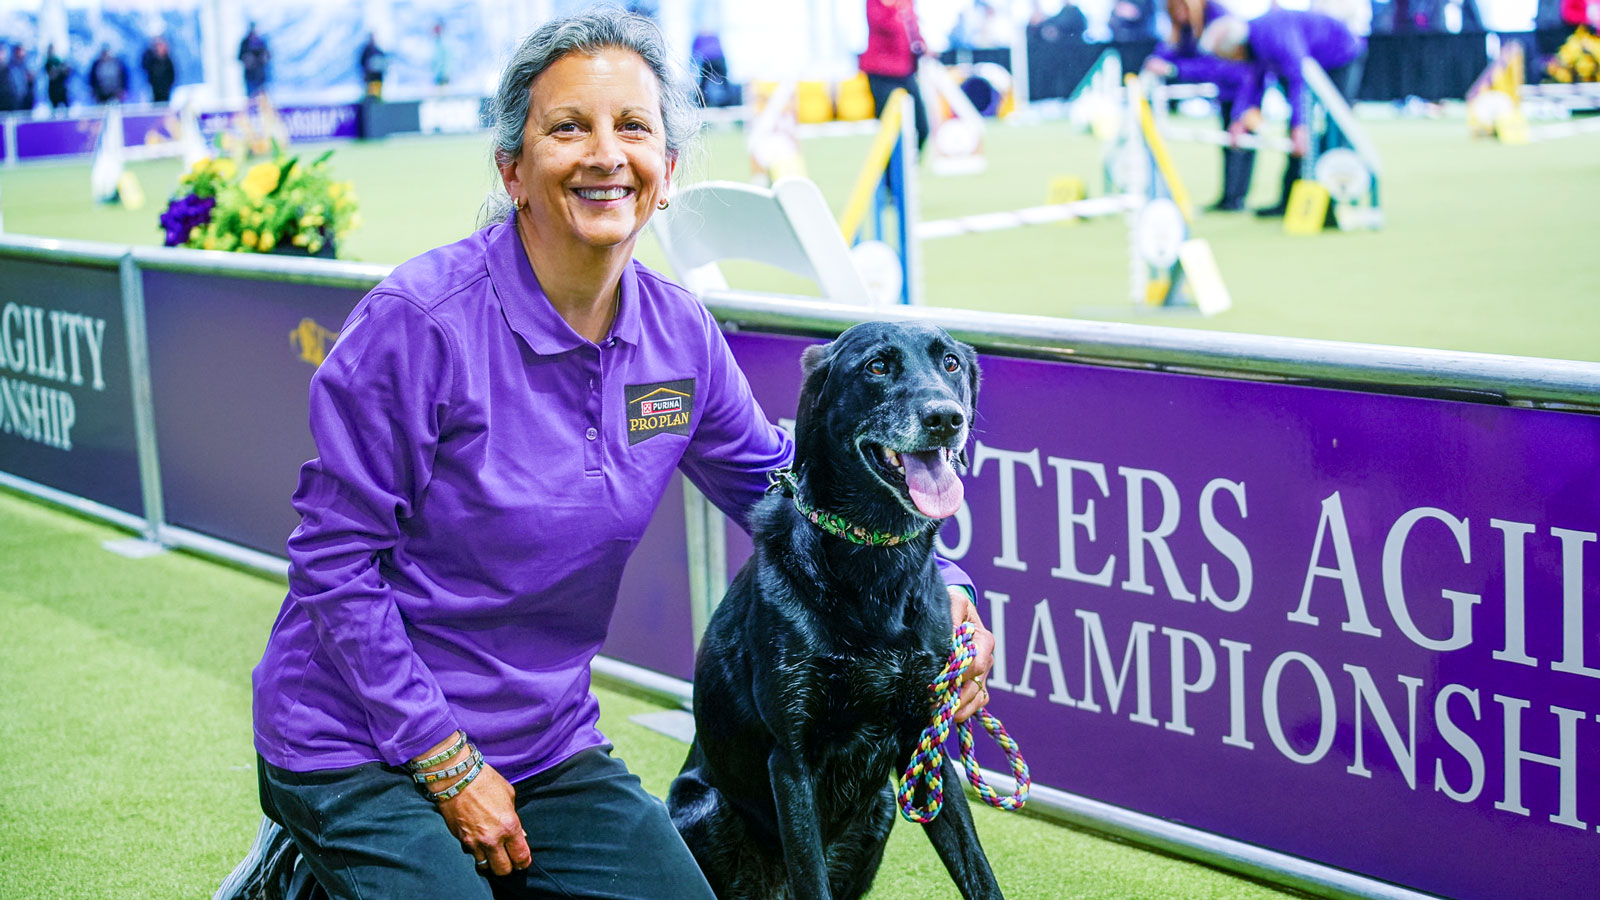 A woman in a purple shirt kneeling next to a black dog next to an agility course